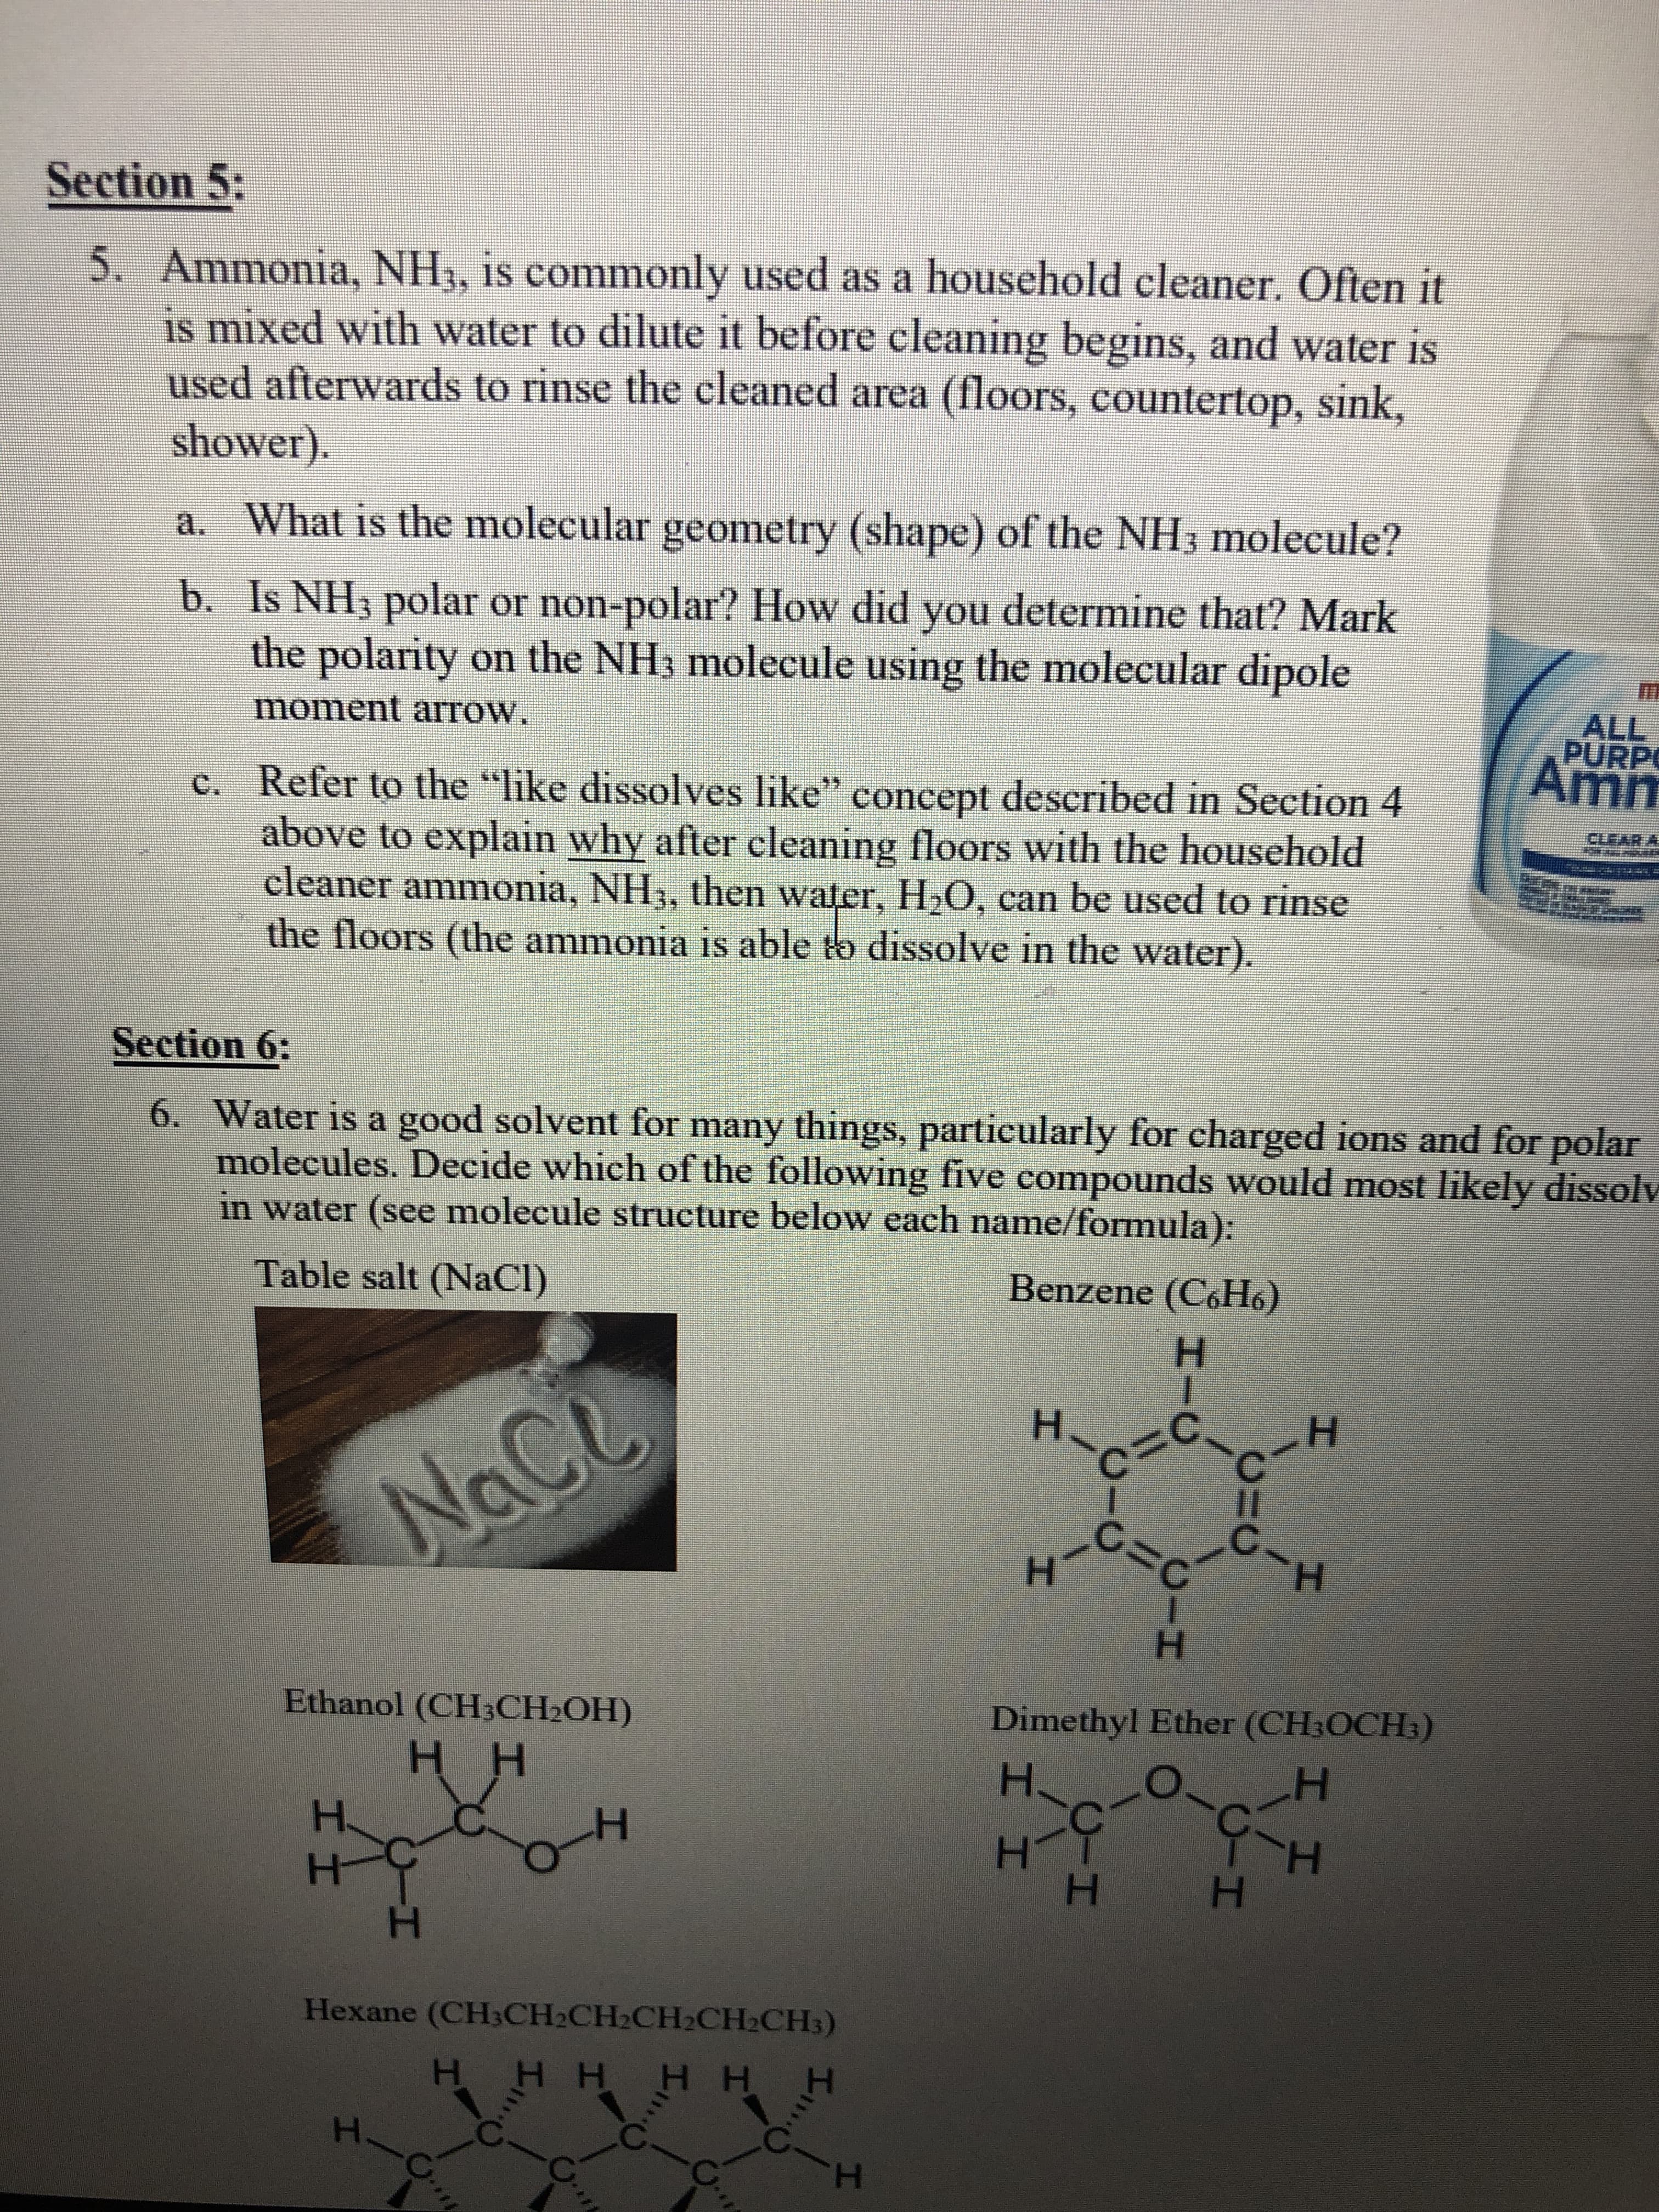 Section 5:
5. Ammonia, NH3, is commonly used as a household cleaner. Often it
is mixed with water to dilute it before cleaning begins, and water is
used afterwards to rinse the cleaned area (floors, countertop, sink,
shower).
a. What is the molecular geometry (shape) of the NH3 molecule?
b. Is NH3 polar or non-polar? How did you determine that? Mark
the polarity on the NH3 molecule using the molecular dipole
ALL
PURPO
moment arrow.
c. Refer to the "like dissolves like" concept described in Section 4
above to explain why after cleaning floors with the household
cleaner ammonia, NH3, then water, H,0, can be used to rinse
the floors (the ammonia is able to dissolve in the water).
CLE
ARA
Section 6:
6. Water is a good solvent for many things, particularly for charged ions and for polar
molecules. Decide which of the following five compounds would most likely dissolv
in water (see molecule structure below each name/formula):
Table salt (NaCl)
Benzene (C6H6)
н
H-czċ.
H.
NaCe
H.
H.
н
Ethanol (CH3CH2OH)
Dimethyl Ether (CH3OCH3)
нн
н.
н
H.
H.
H.
Hexane (CH3CH2CH2CH2CH2CH3)
н НН Нн н
C..
H.
CIH
CIH
CIH
Sい
